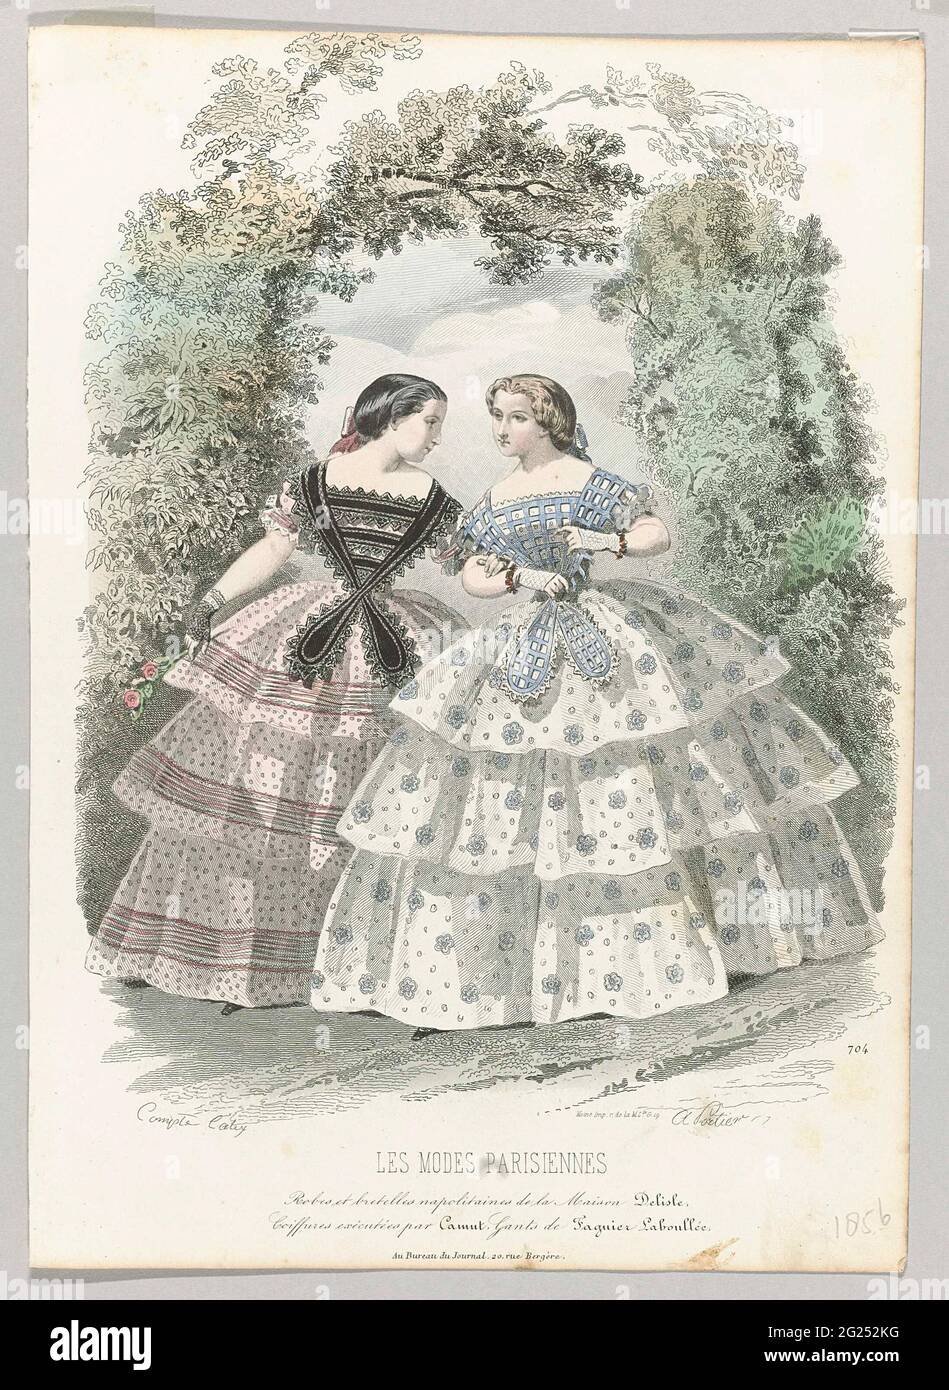 Les Modes Parisiennes, 1856, No. 704: Robes et Bretelles (...). Two women  hiking armed in a park. According to the caption: dresses and 'Bretelles  Napolitaines' from Maison Delisle. Below some rules advertising